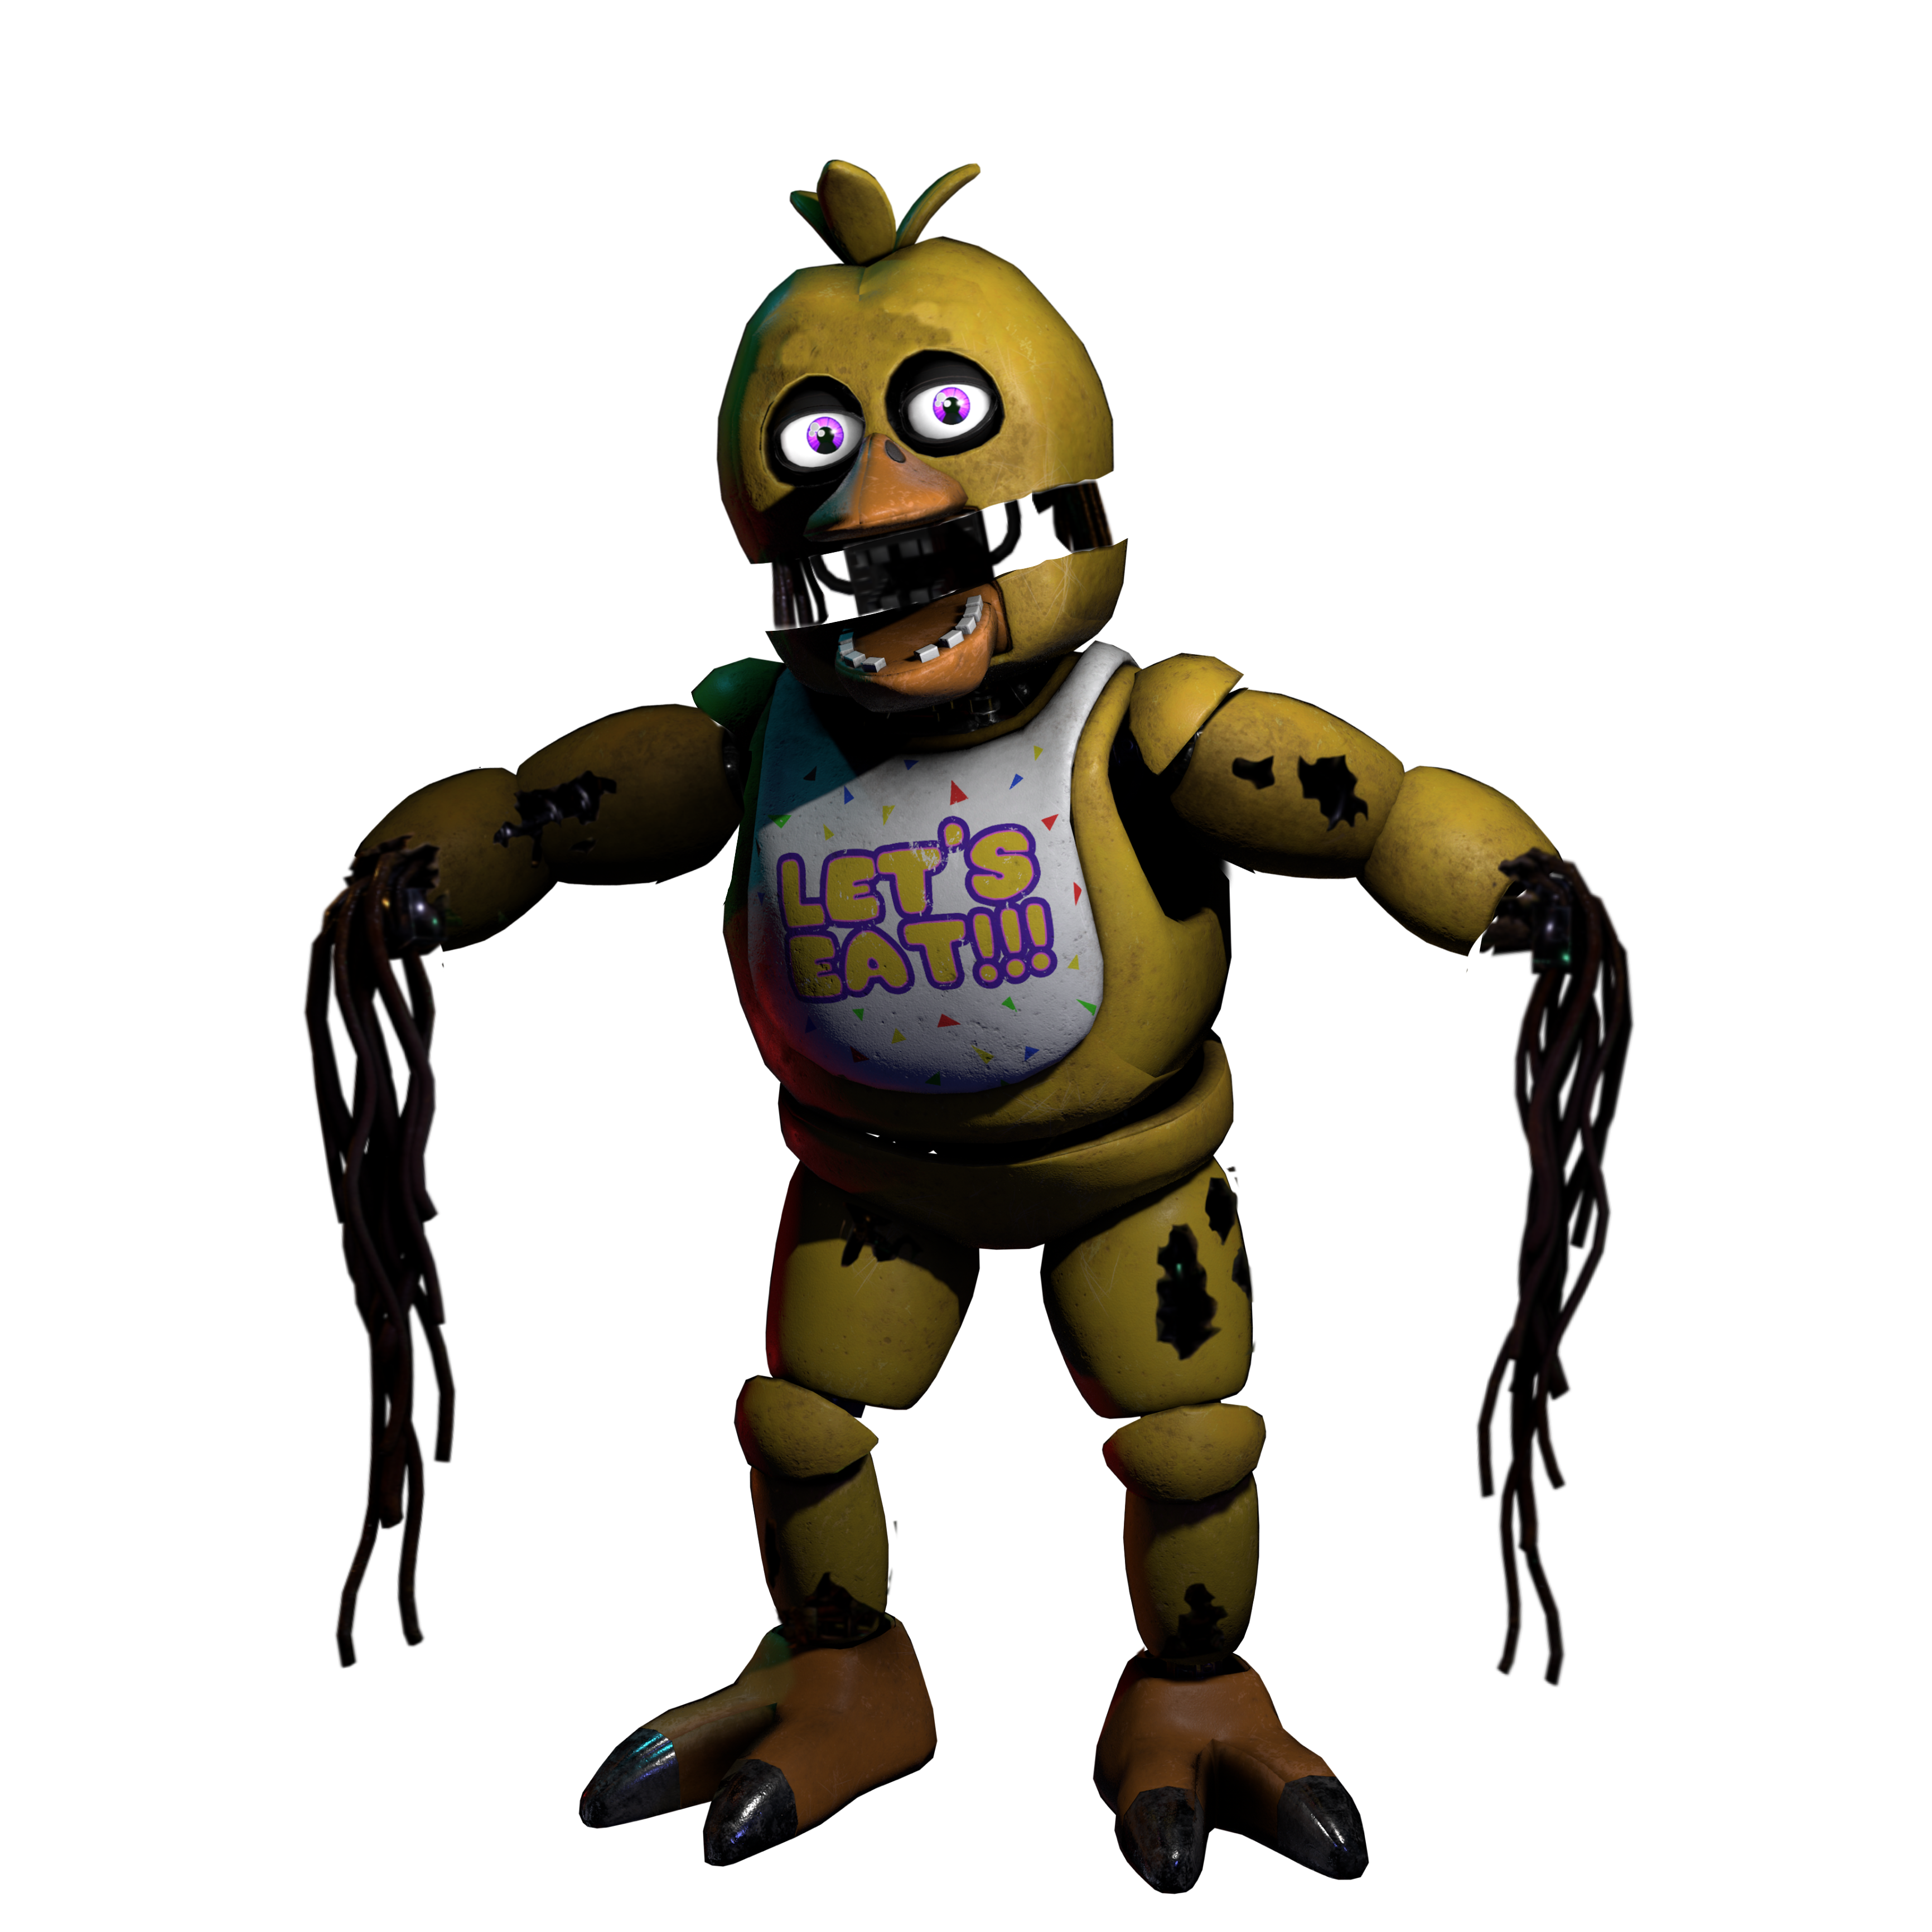 Fnaf Speed Edit, Fixed Withered Chica